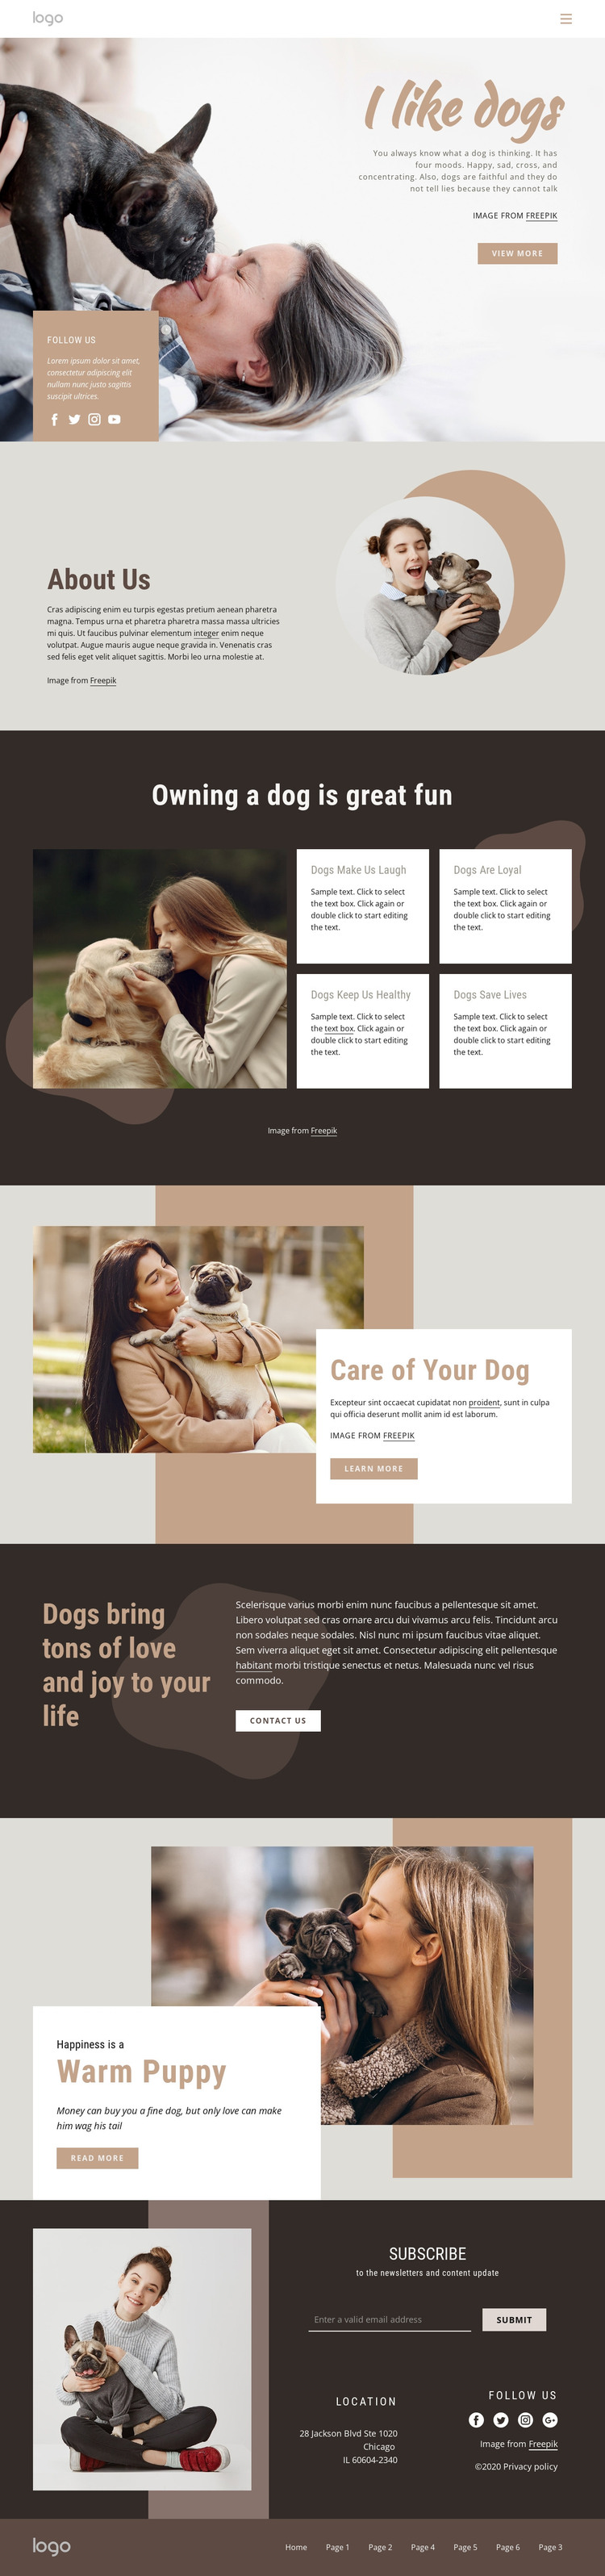 All about dogs Web Design